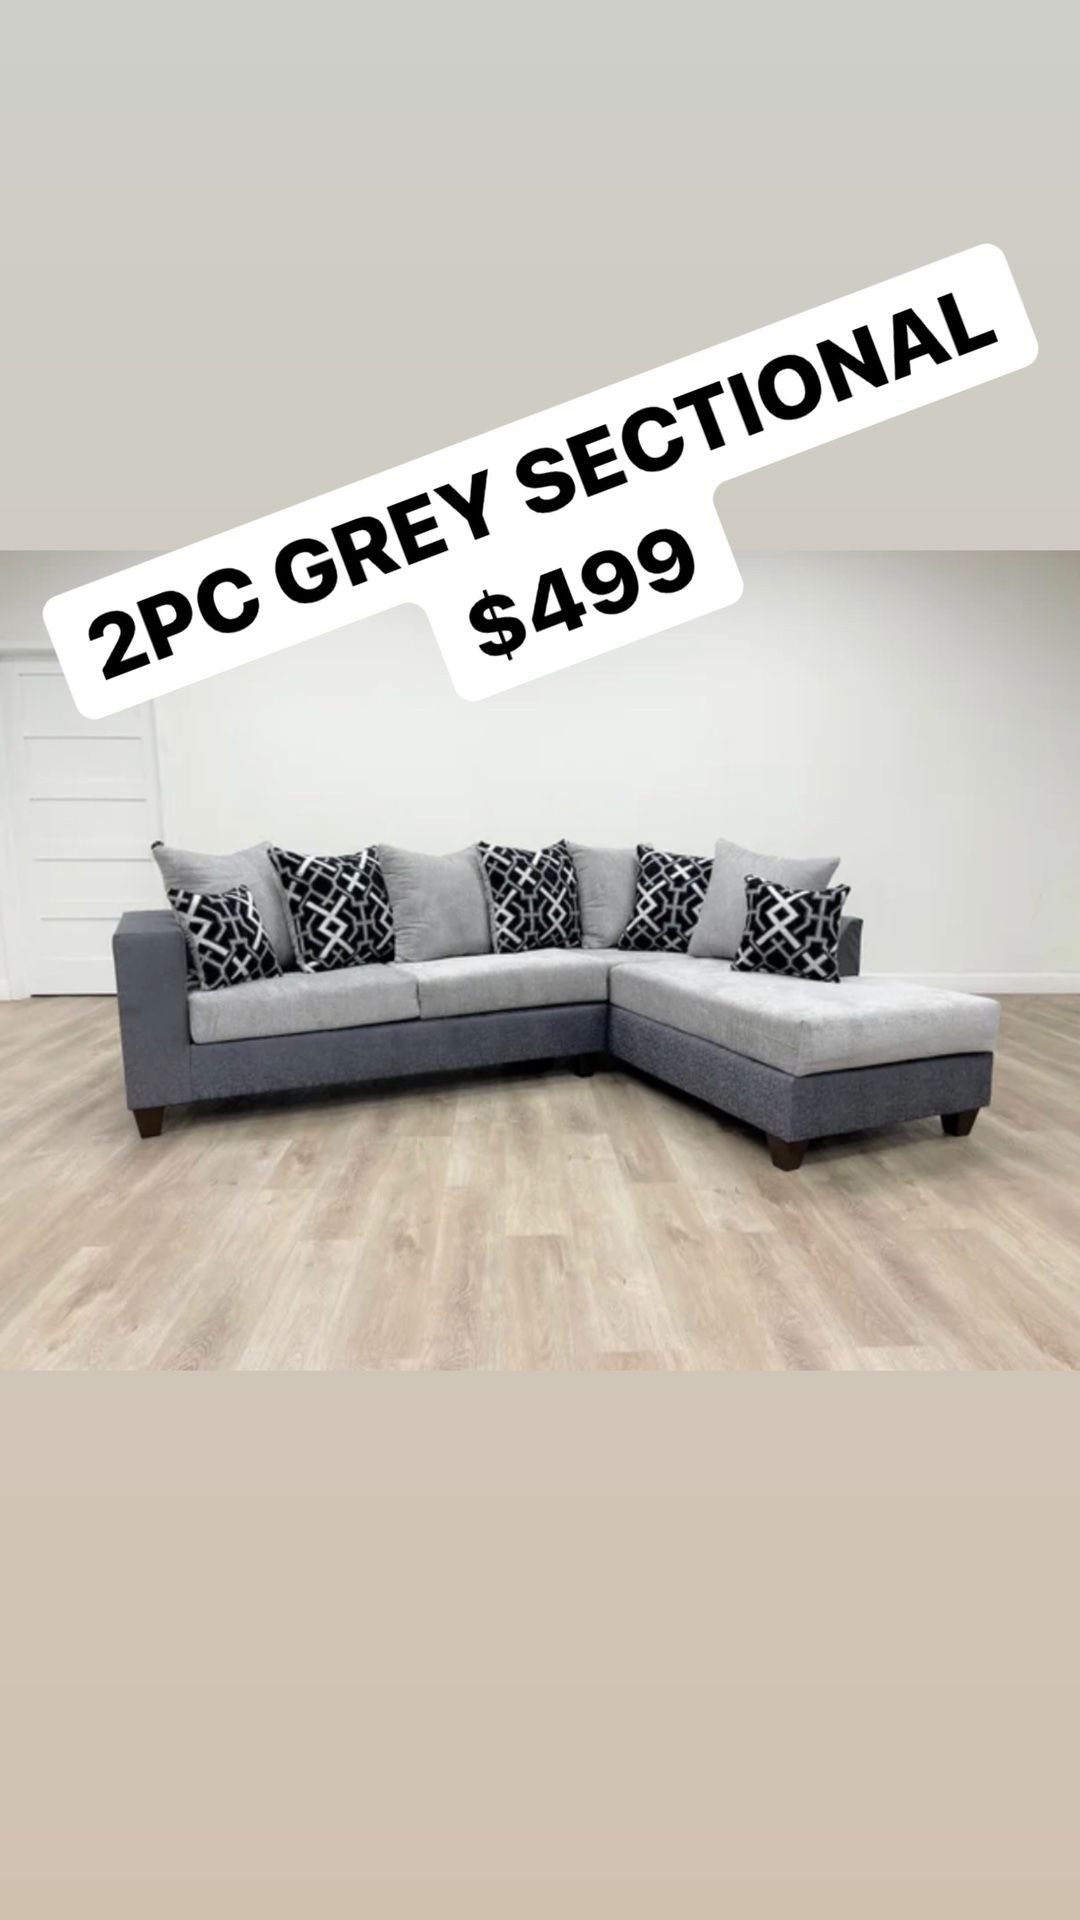 2pc Grey 2 Tone Sectional 